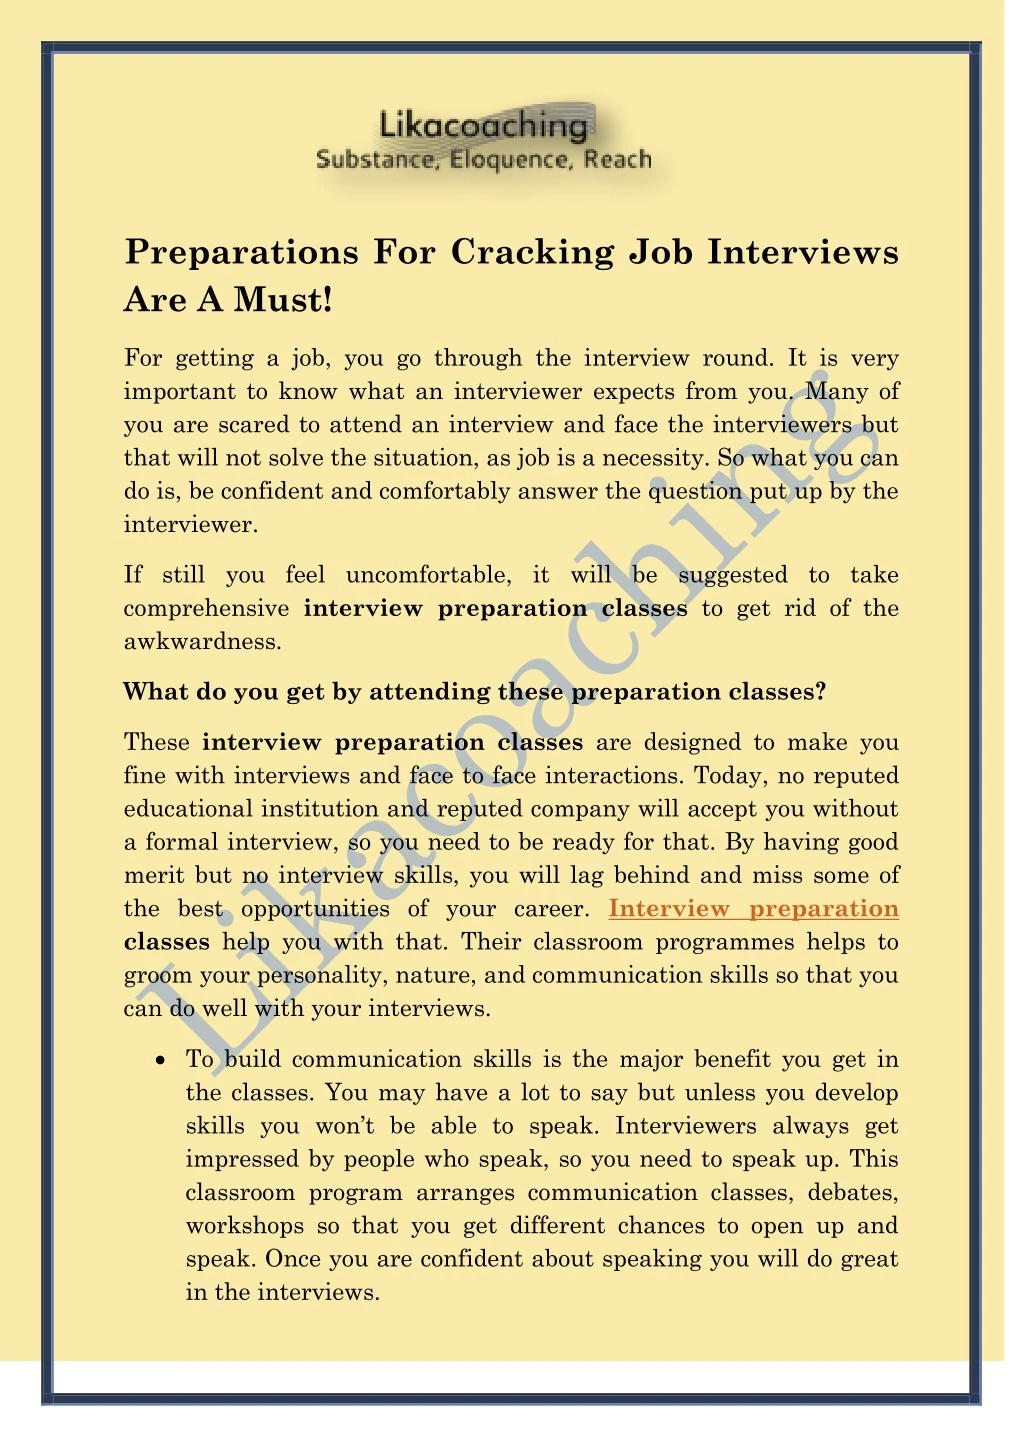 preparations for cracking job interviews